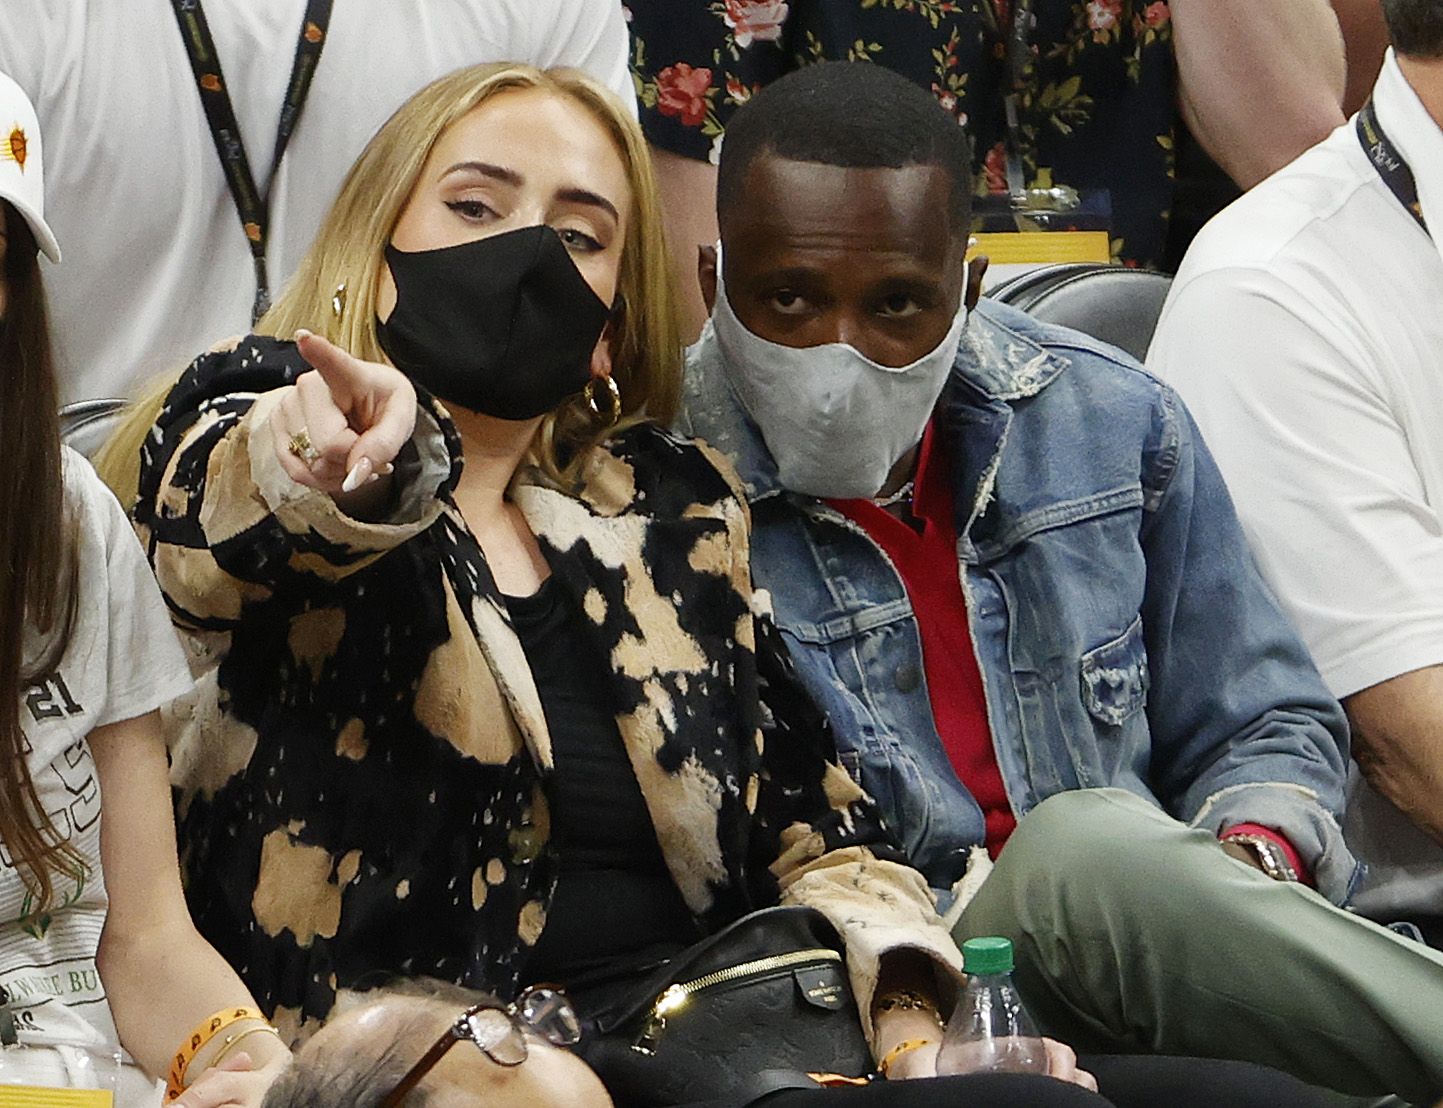 Who Is Adele's Boyfriend, Rich Paul? Their Full Relationship Timeline.